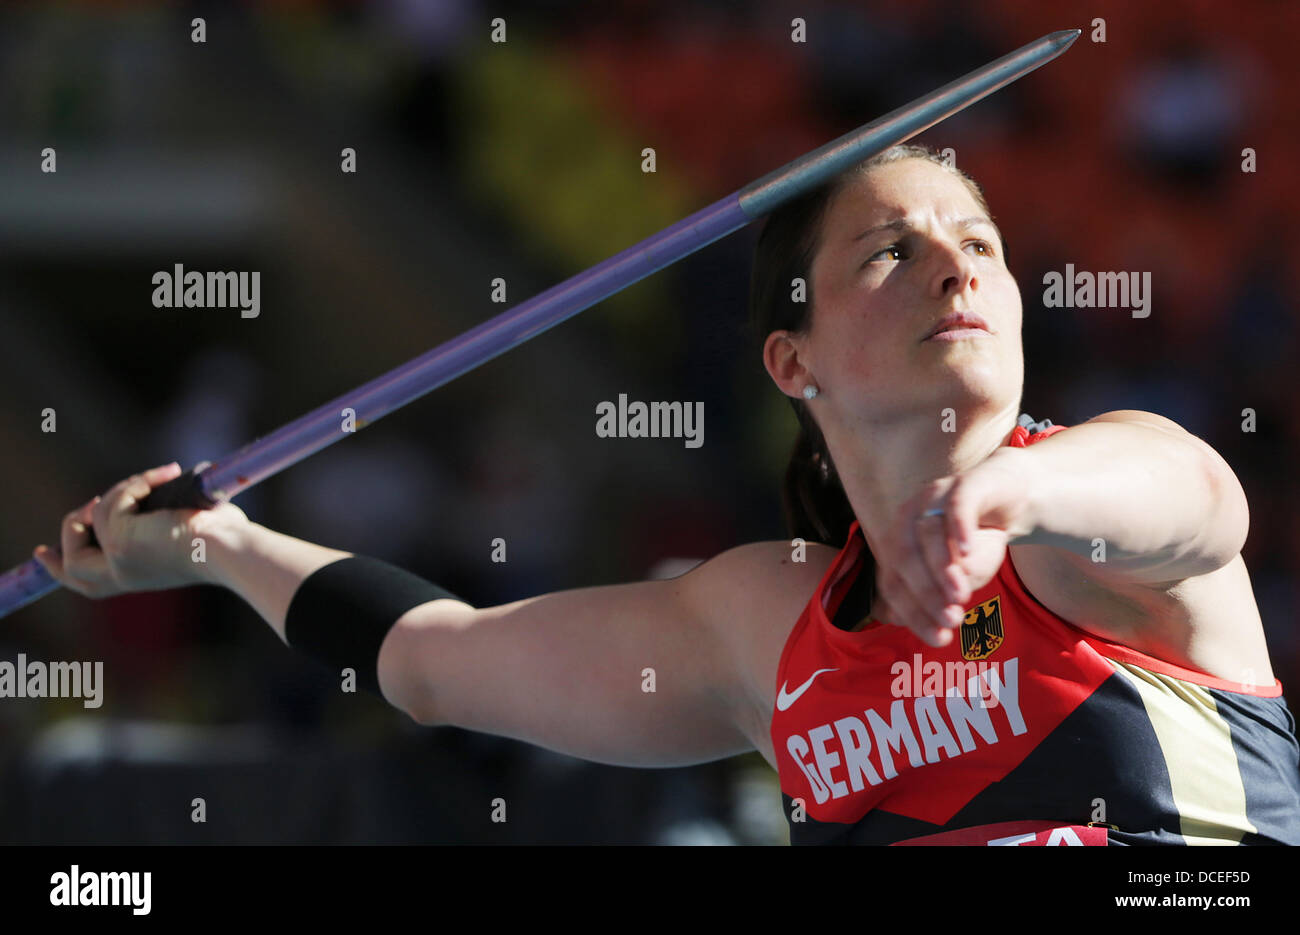 Moscow, Russia. 16th Aug, 2013. Linda Stahl of Germany competes in the Javelin Throw Qualification at the 14th IAAF World Championships in Athletics at Luzhniki Stadium in Moscow, Russia, 16 August 2013. Photo: Michael Kappeler/dpa/Alamy Live News Stock Photo